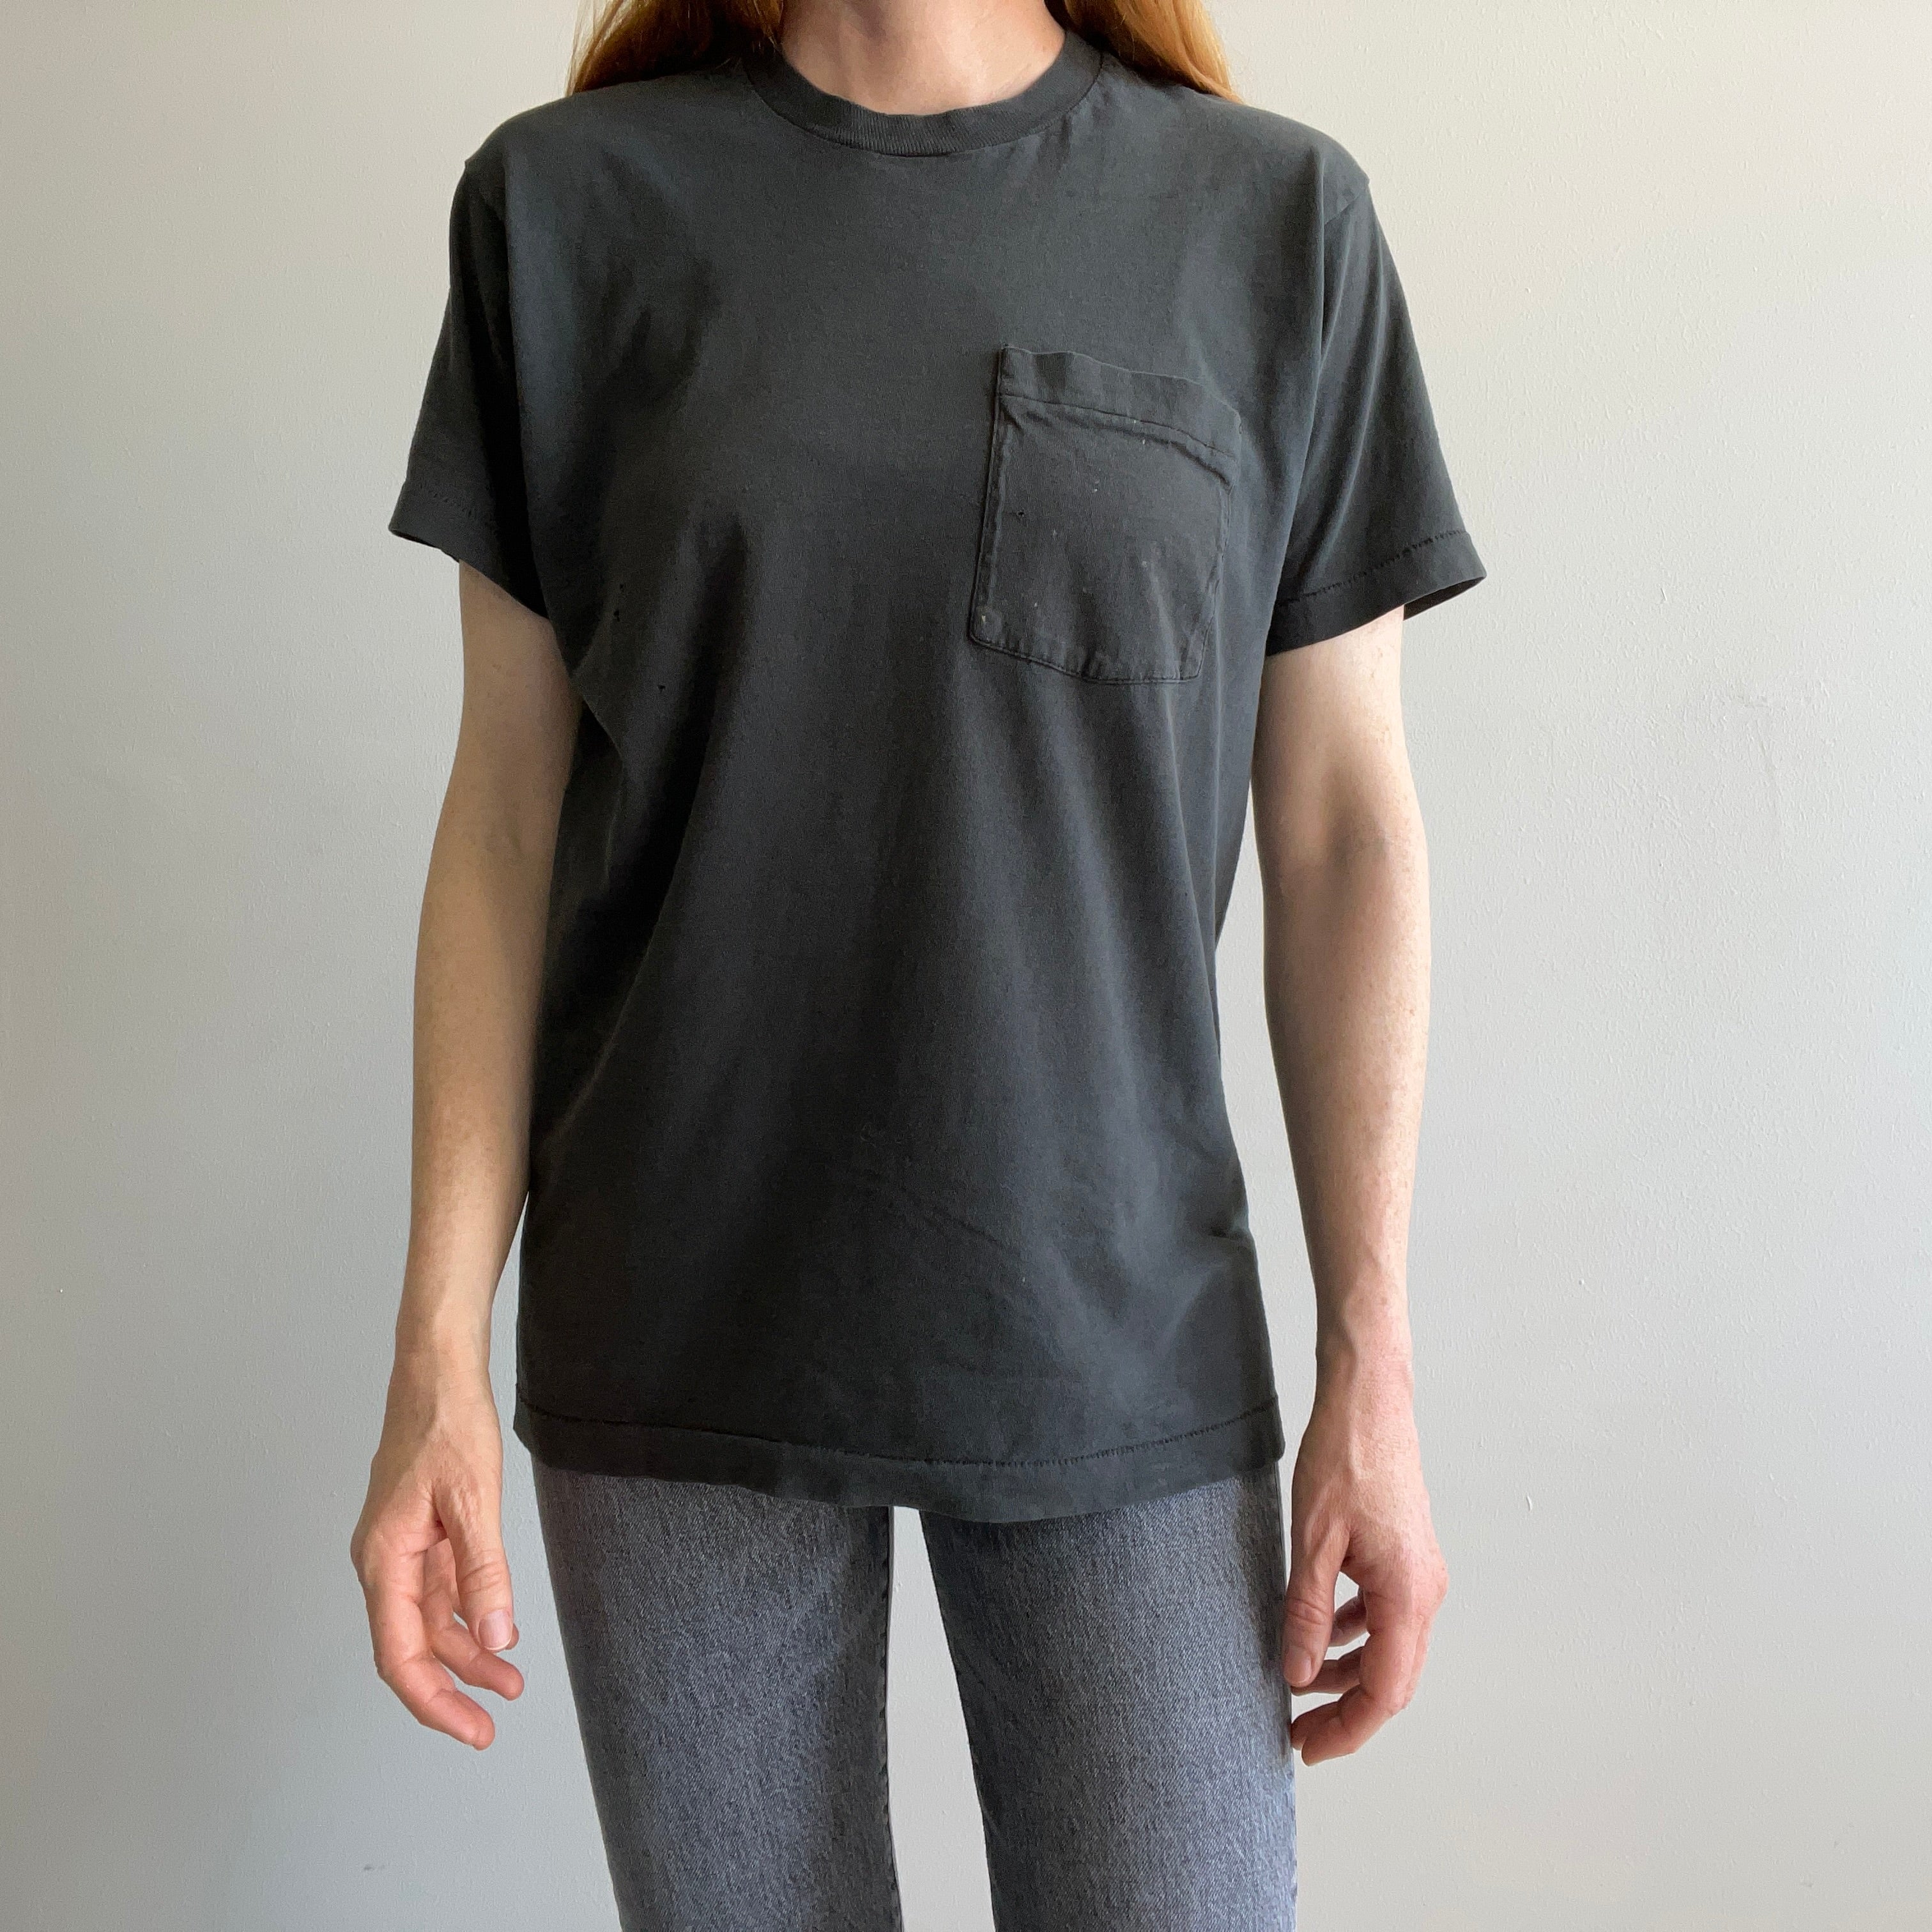 1980s Thrashed Selvedge Pocket Blank Black Cotton T-Shirt - Personal Collection